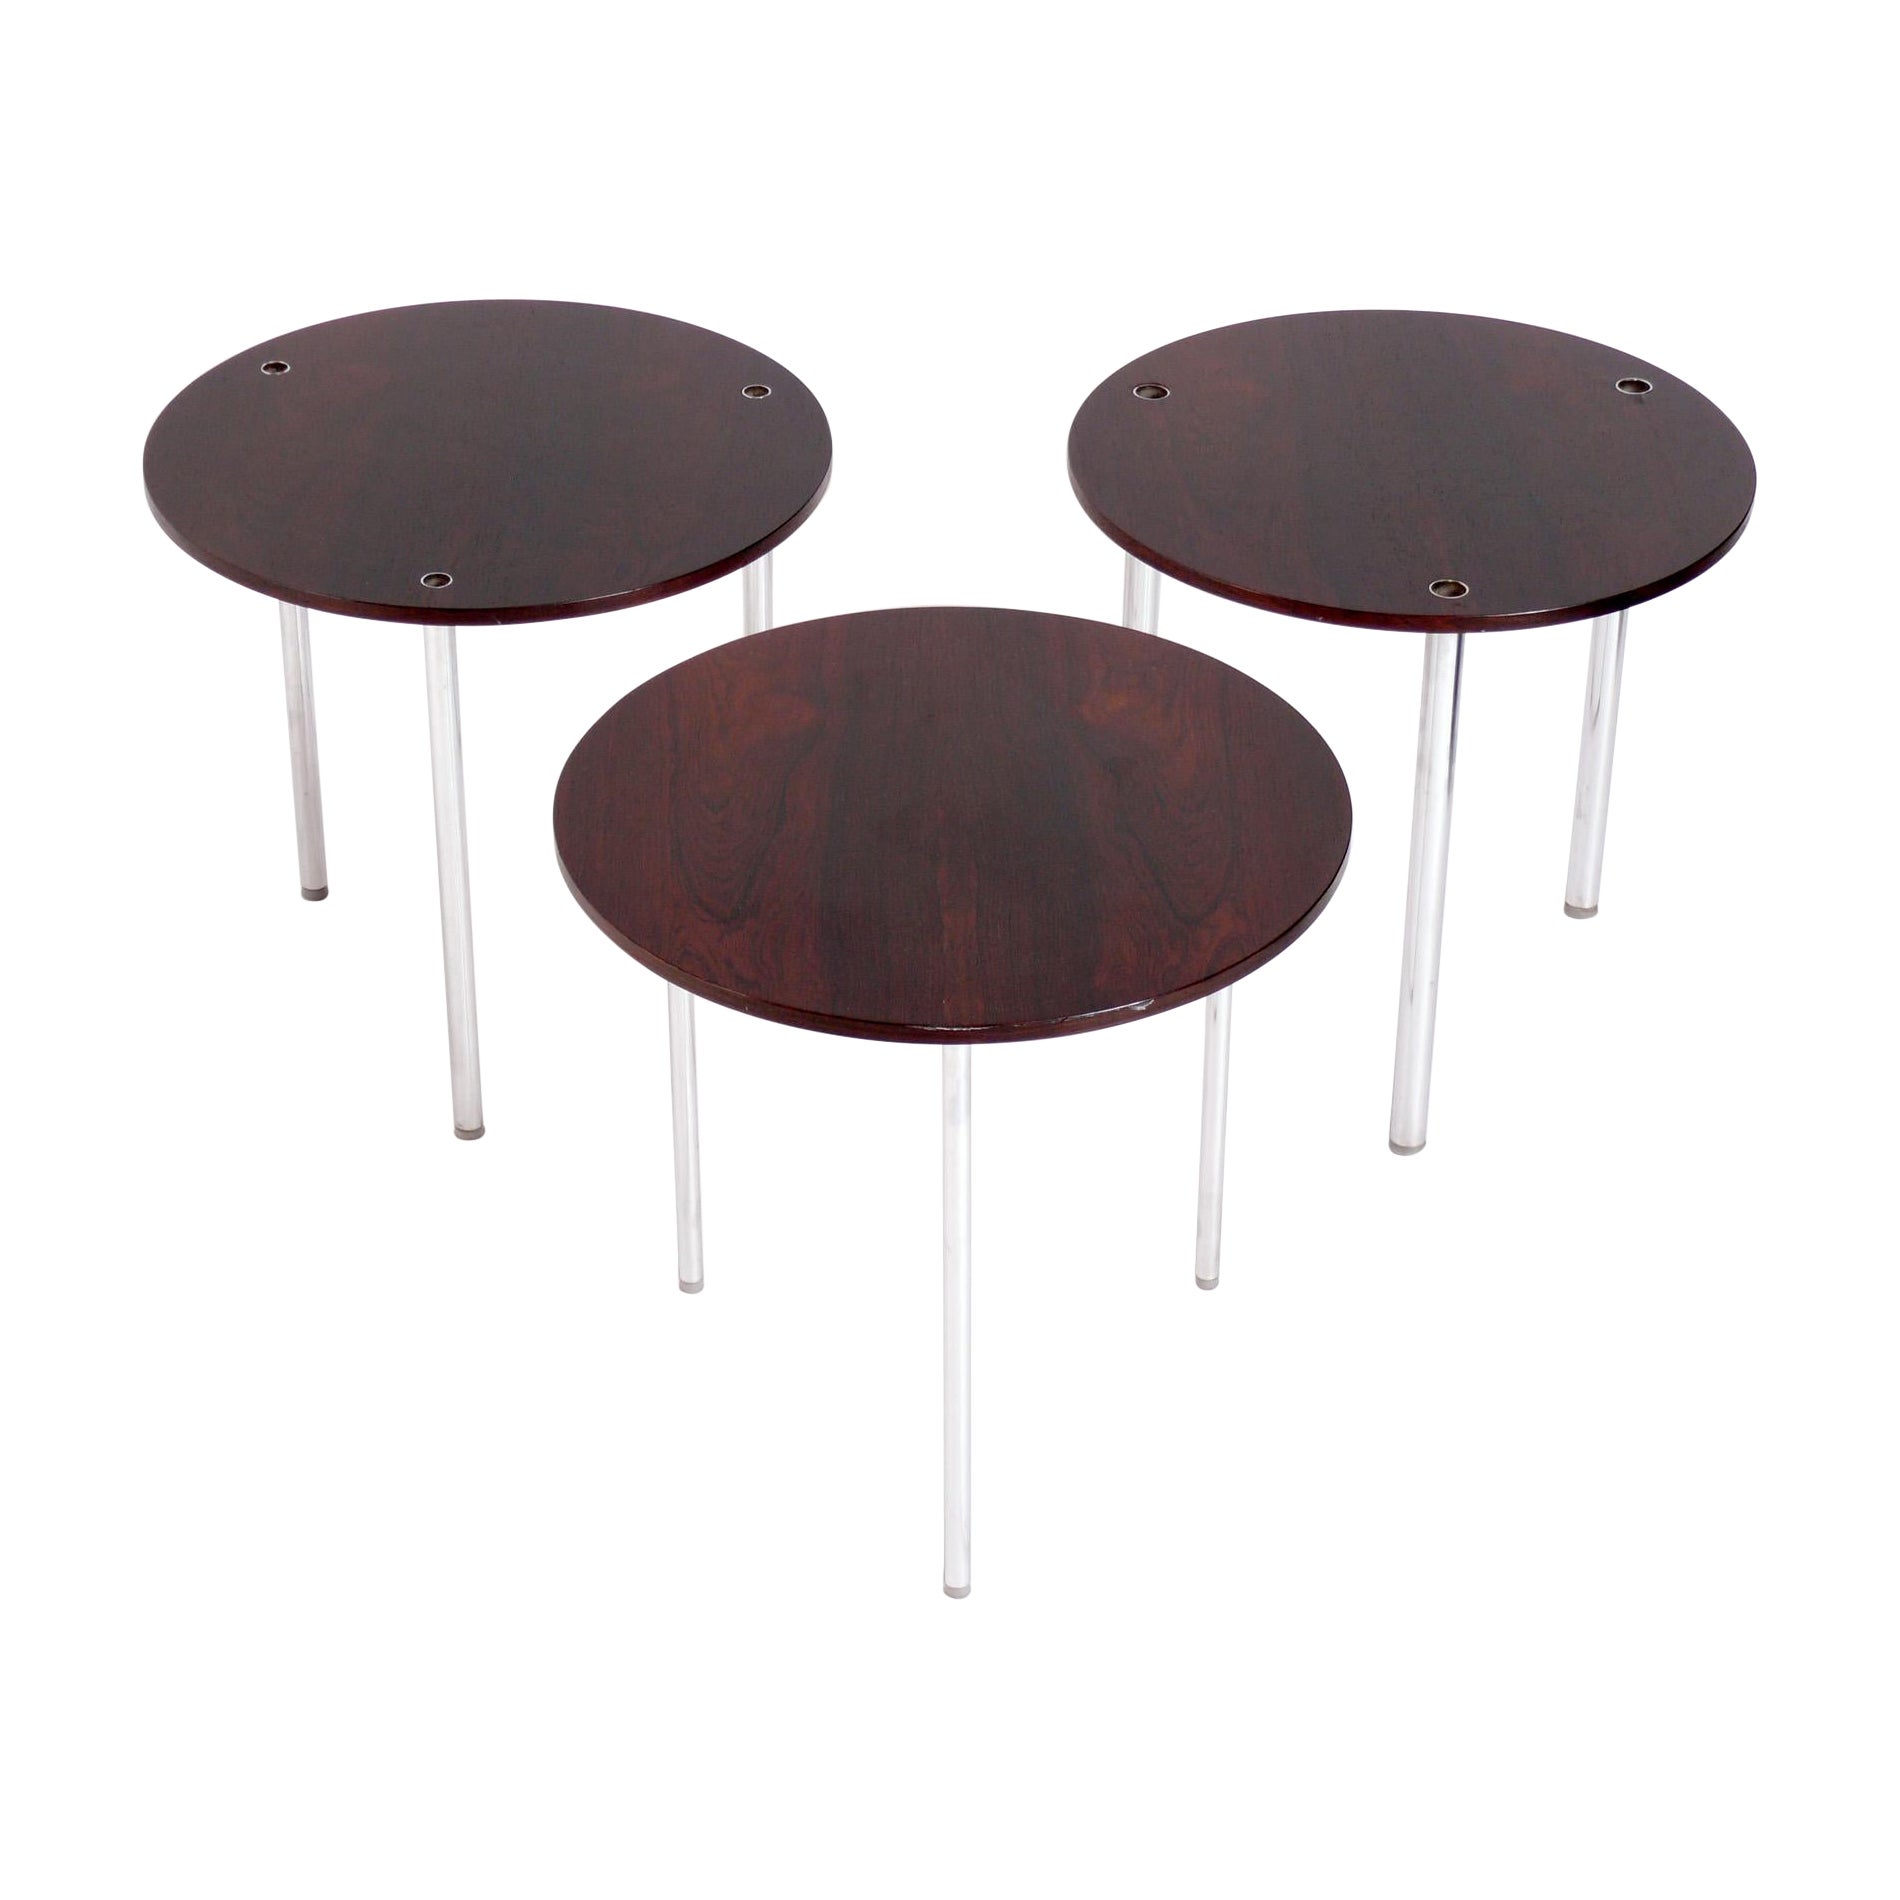 Danish Modern Rosewood Stacking Tables by Poul Norreklit   For Sale